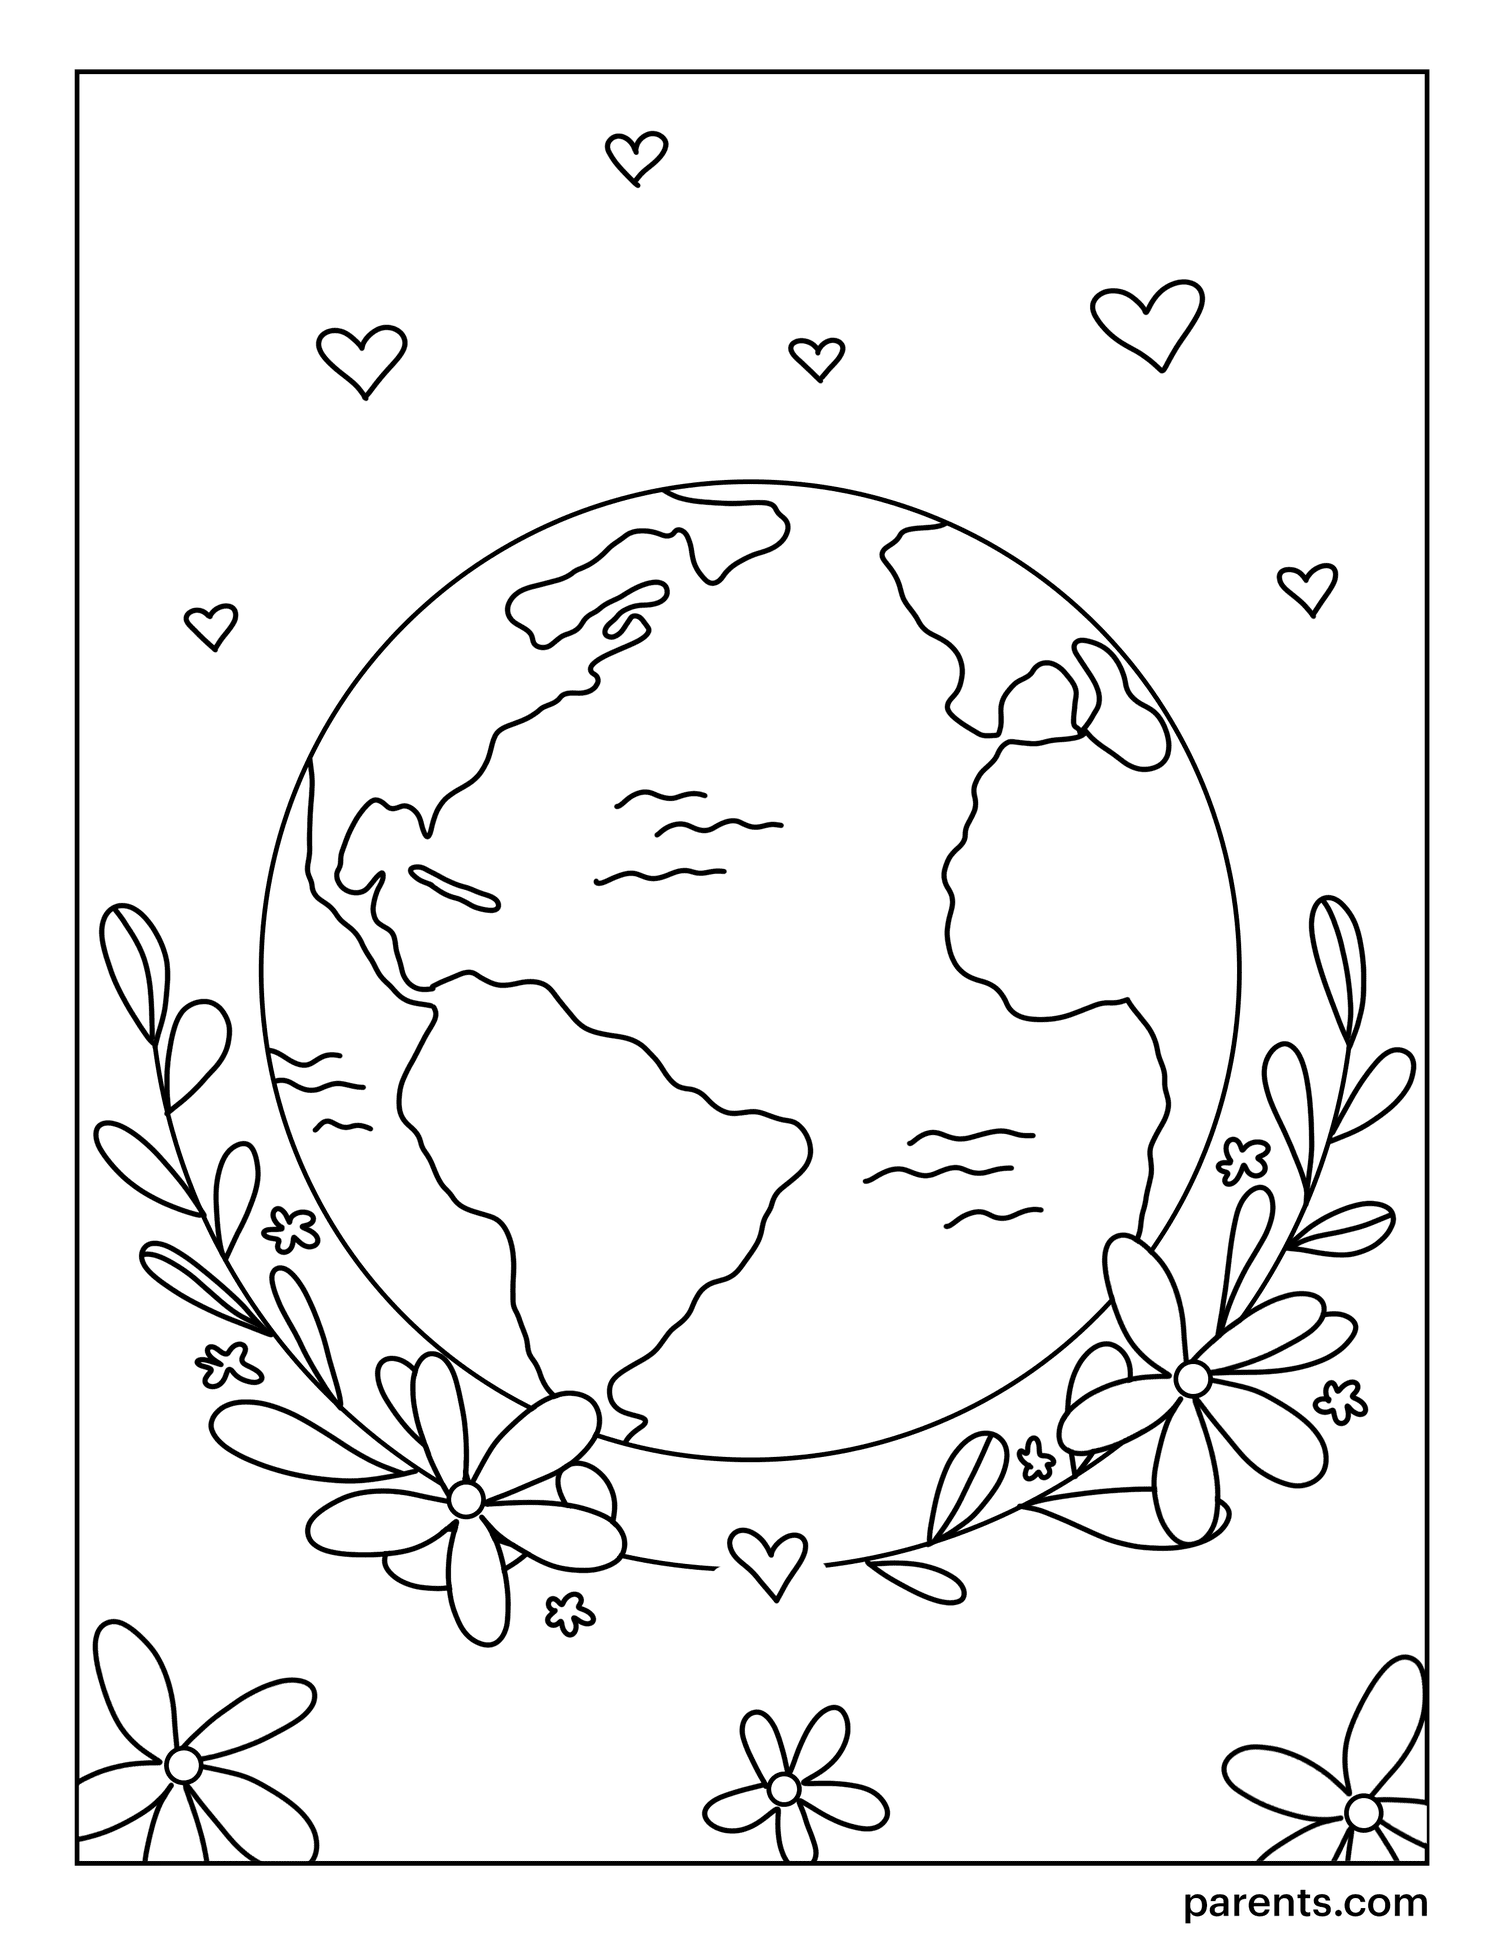 27+ Earth Day Coloring Page Background – survival-raid.com